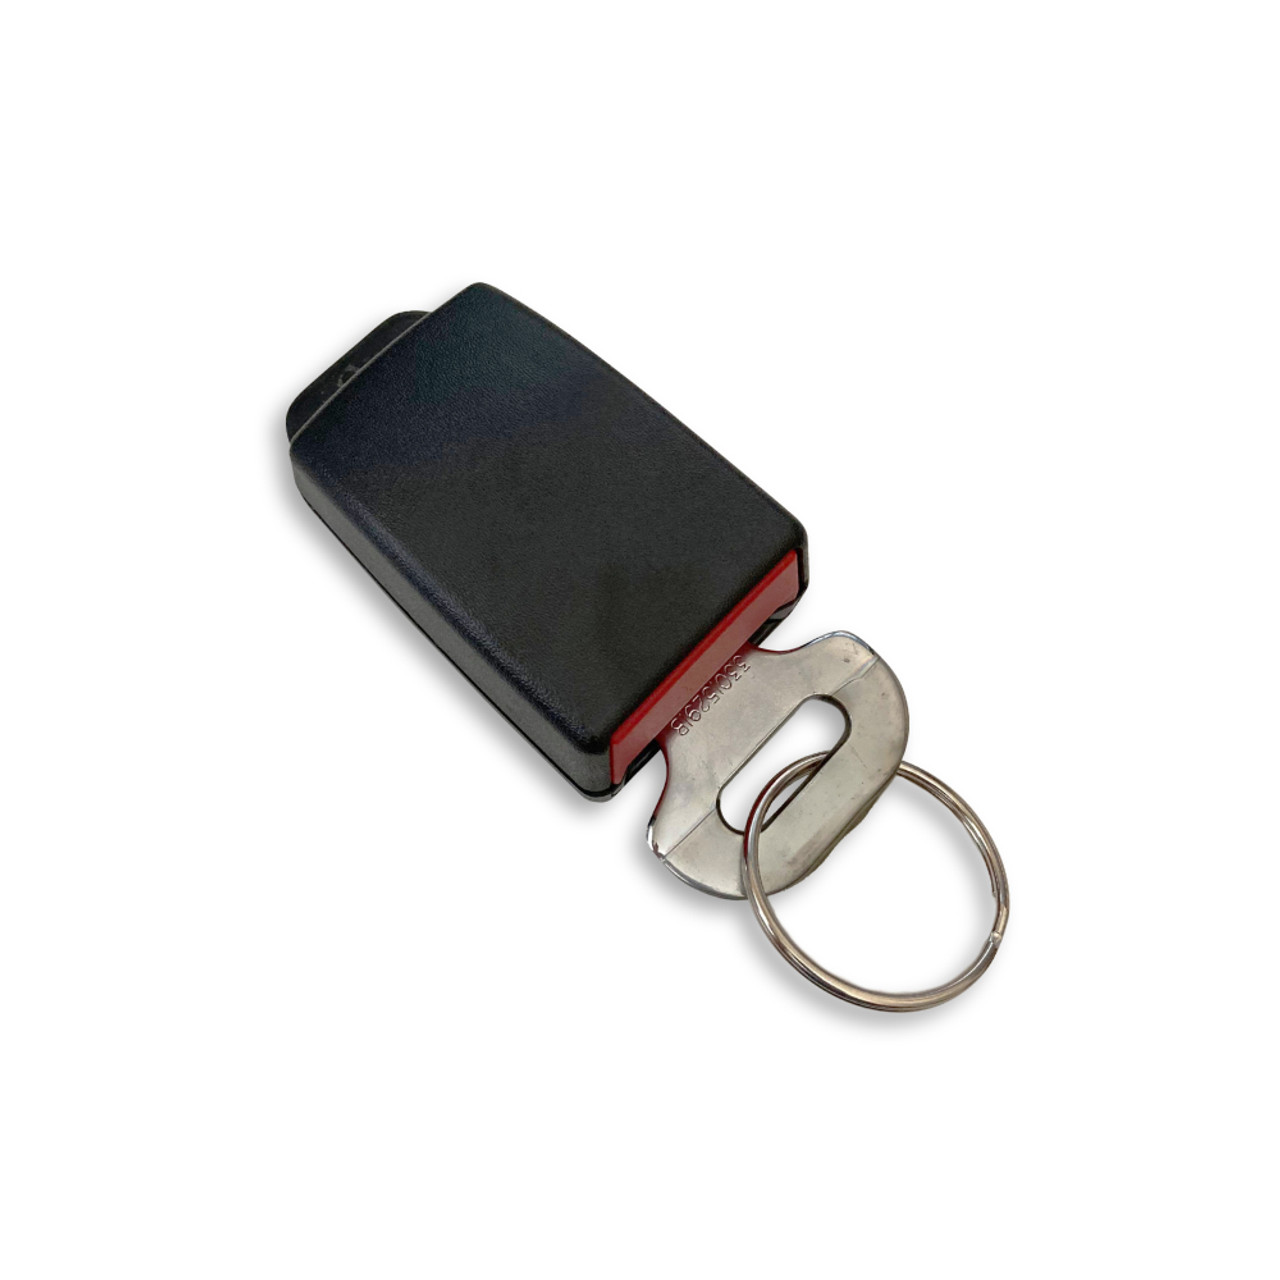 LEERLY Key Fob Cover for Cadillac Accessories, Key Case with Key